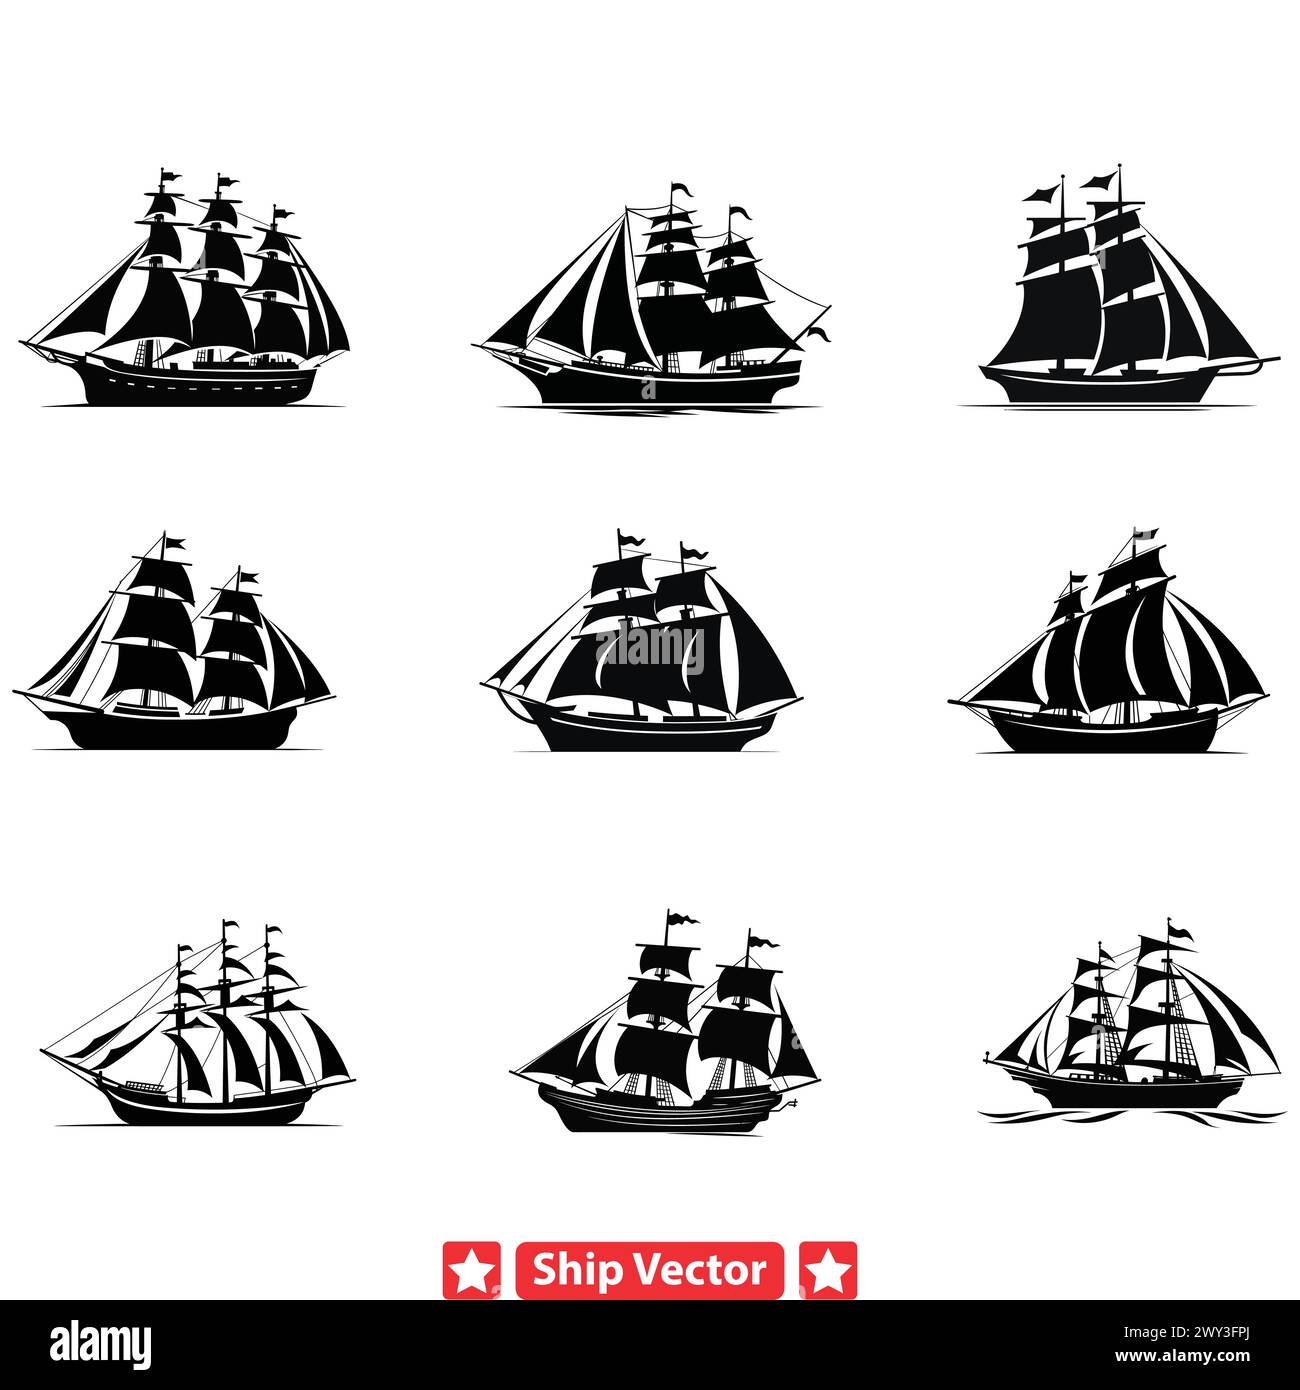 Sailing into the Unknown  Enigmatic Ship Silhouettes Symbolizing Courage and Discovery Stock Vector